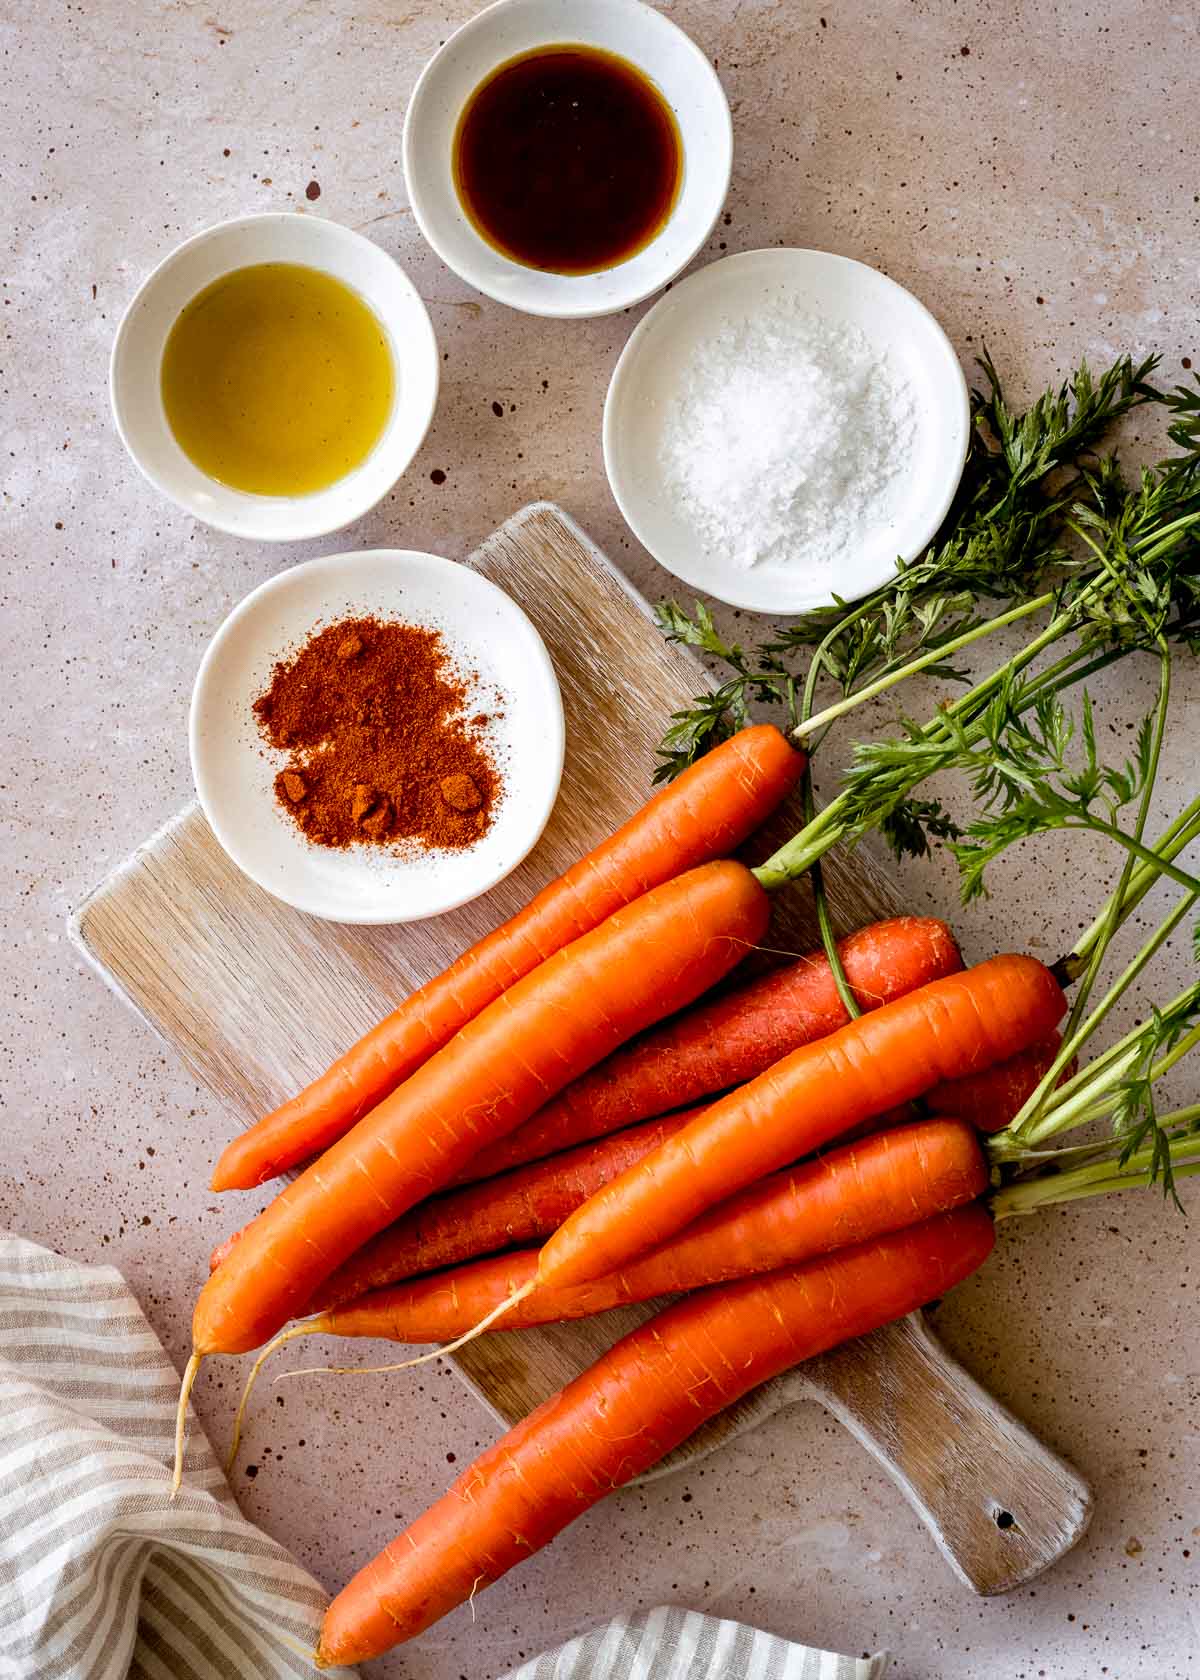 Ingredients to make maple syrup roasted carrots: carrots, cayenne pepper, sea salt, olive oil and maple syrup.